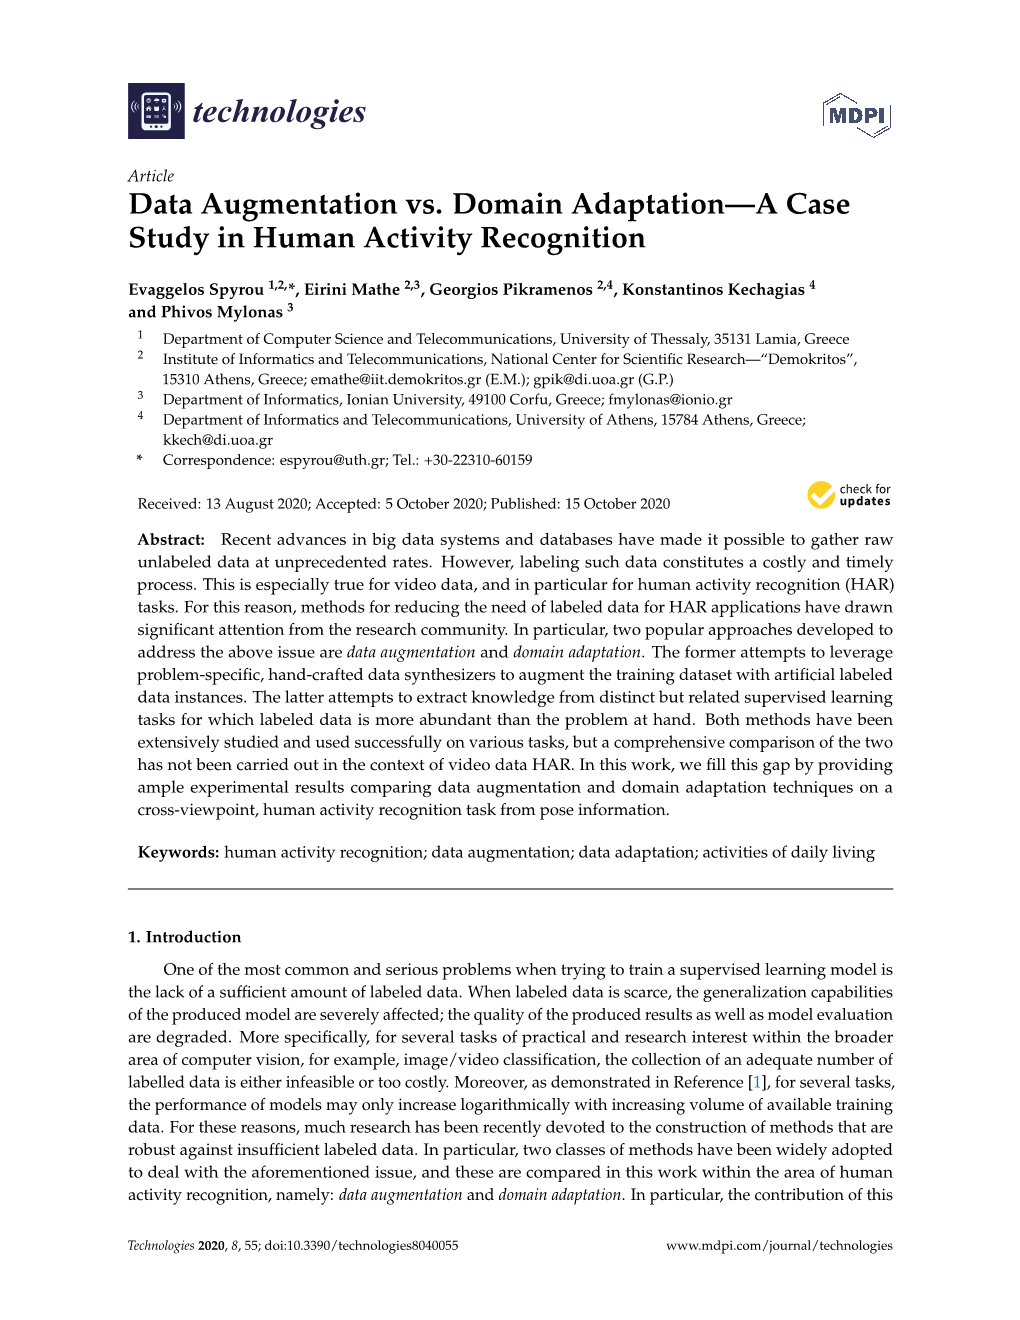 Data Augmentation Vs. Domain Adaptation—A Case Study in Human Activity Recognition